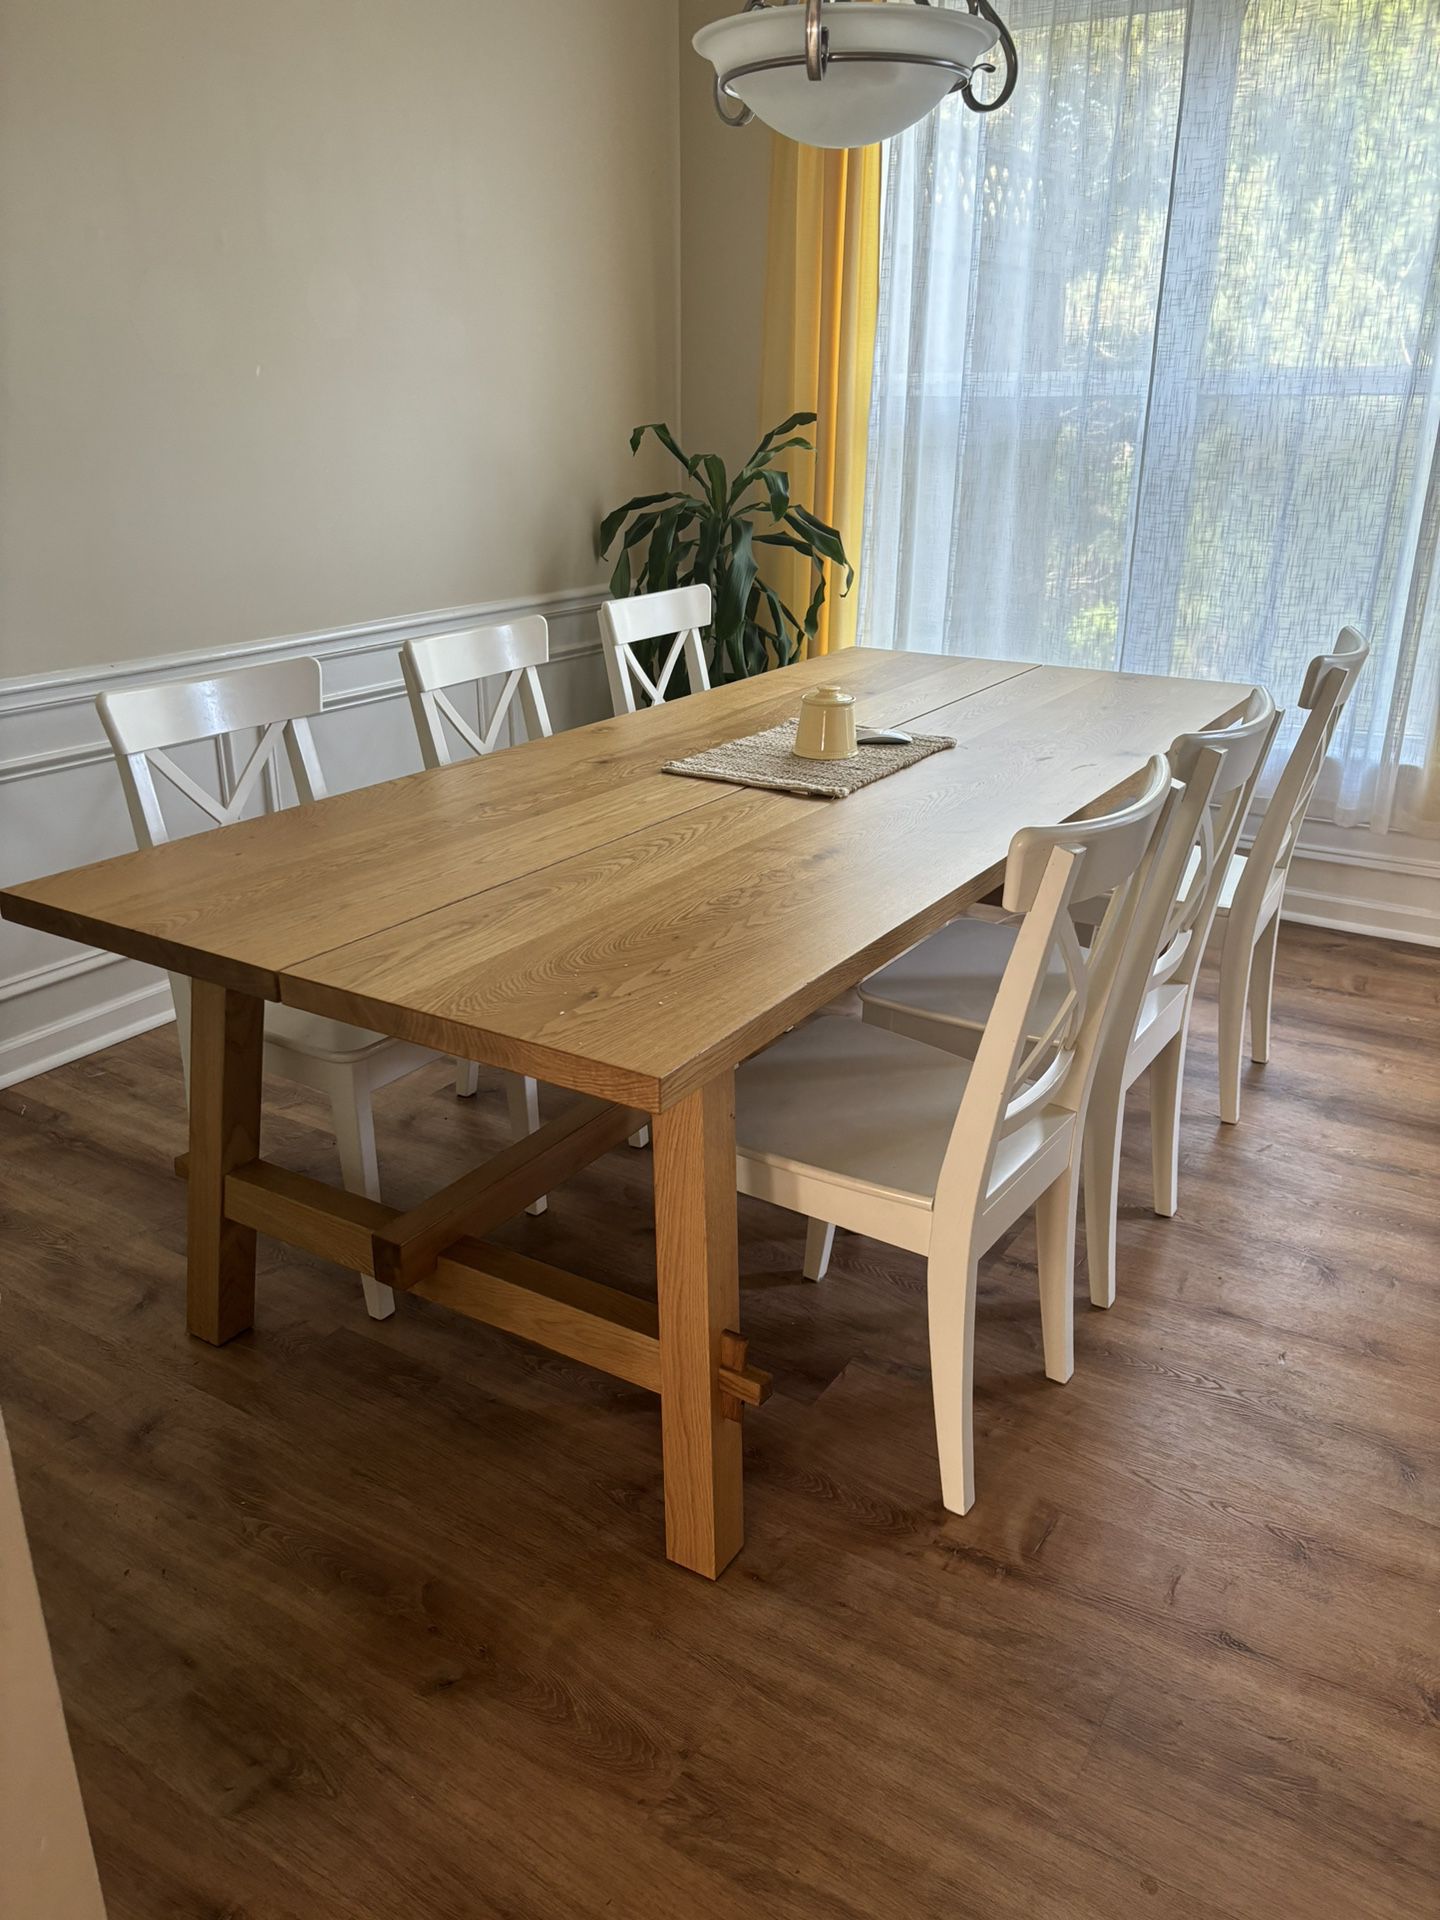 IKEA Dining Table With 6 Chairs 